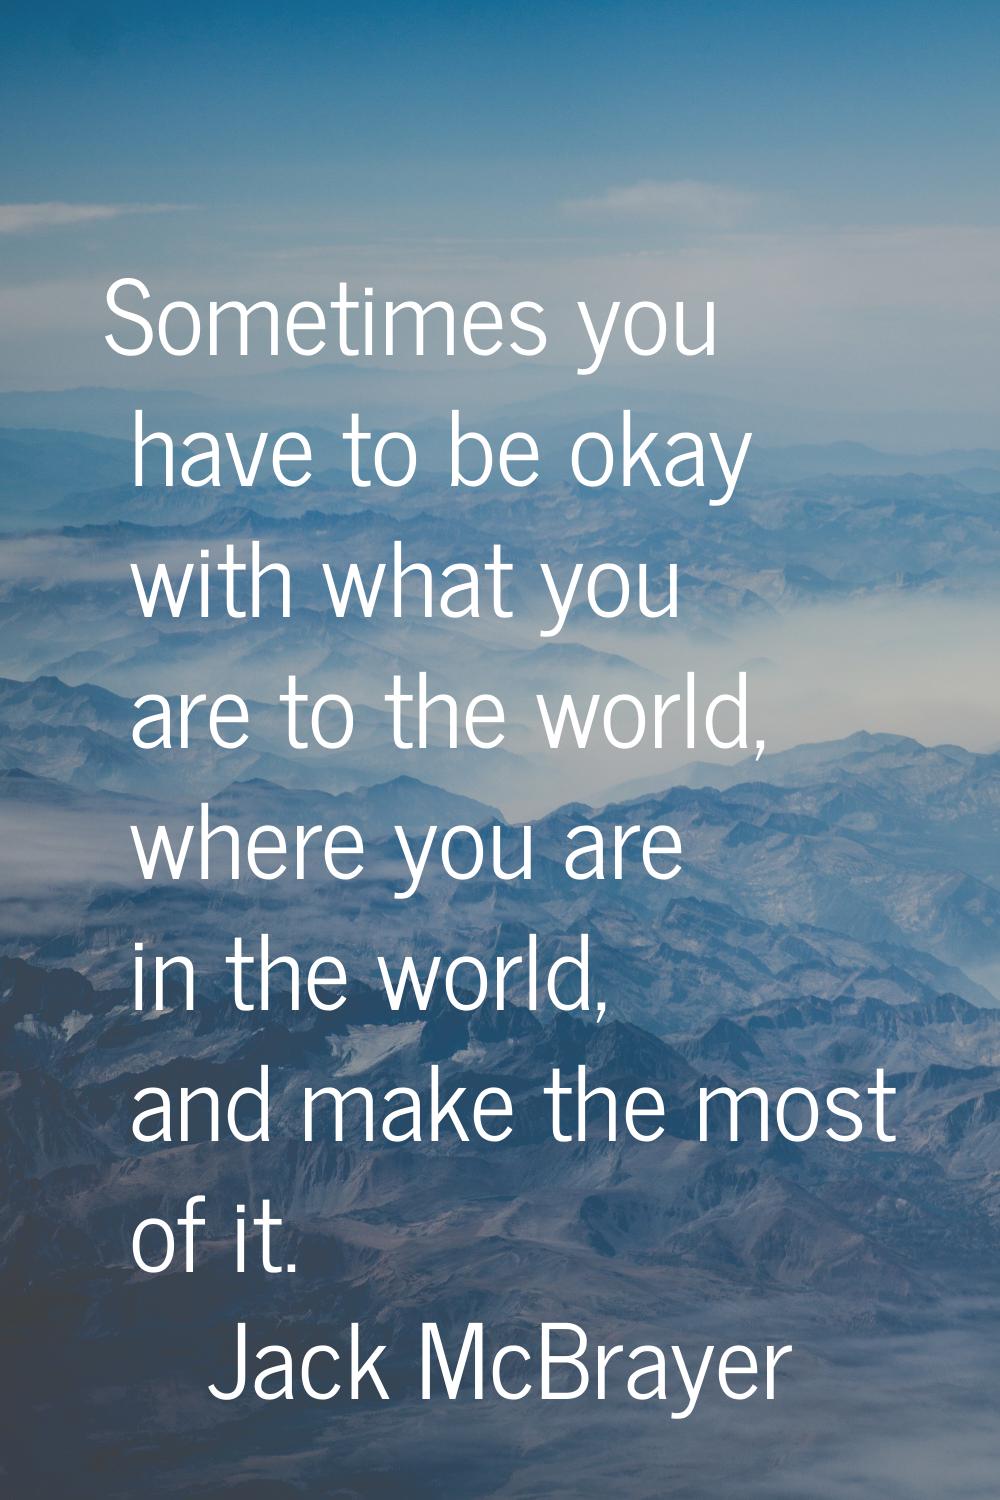 Sometimes you have to be okay with what you are to the world, where you are in the world, and make 